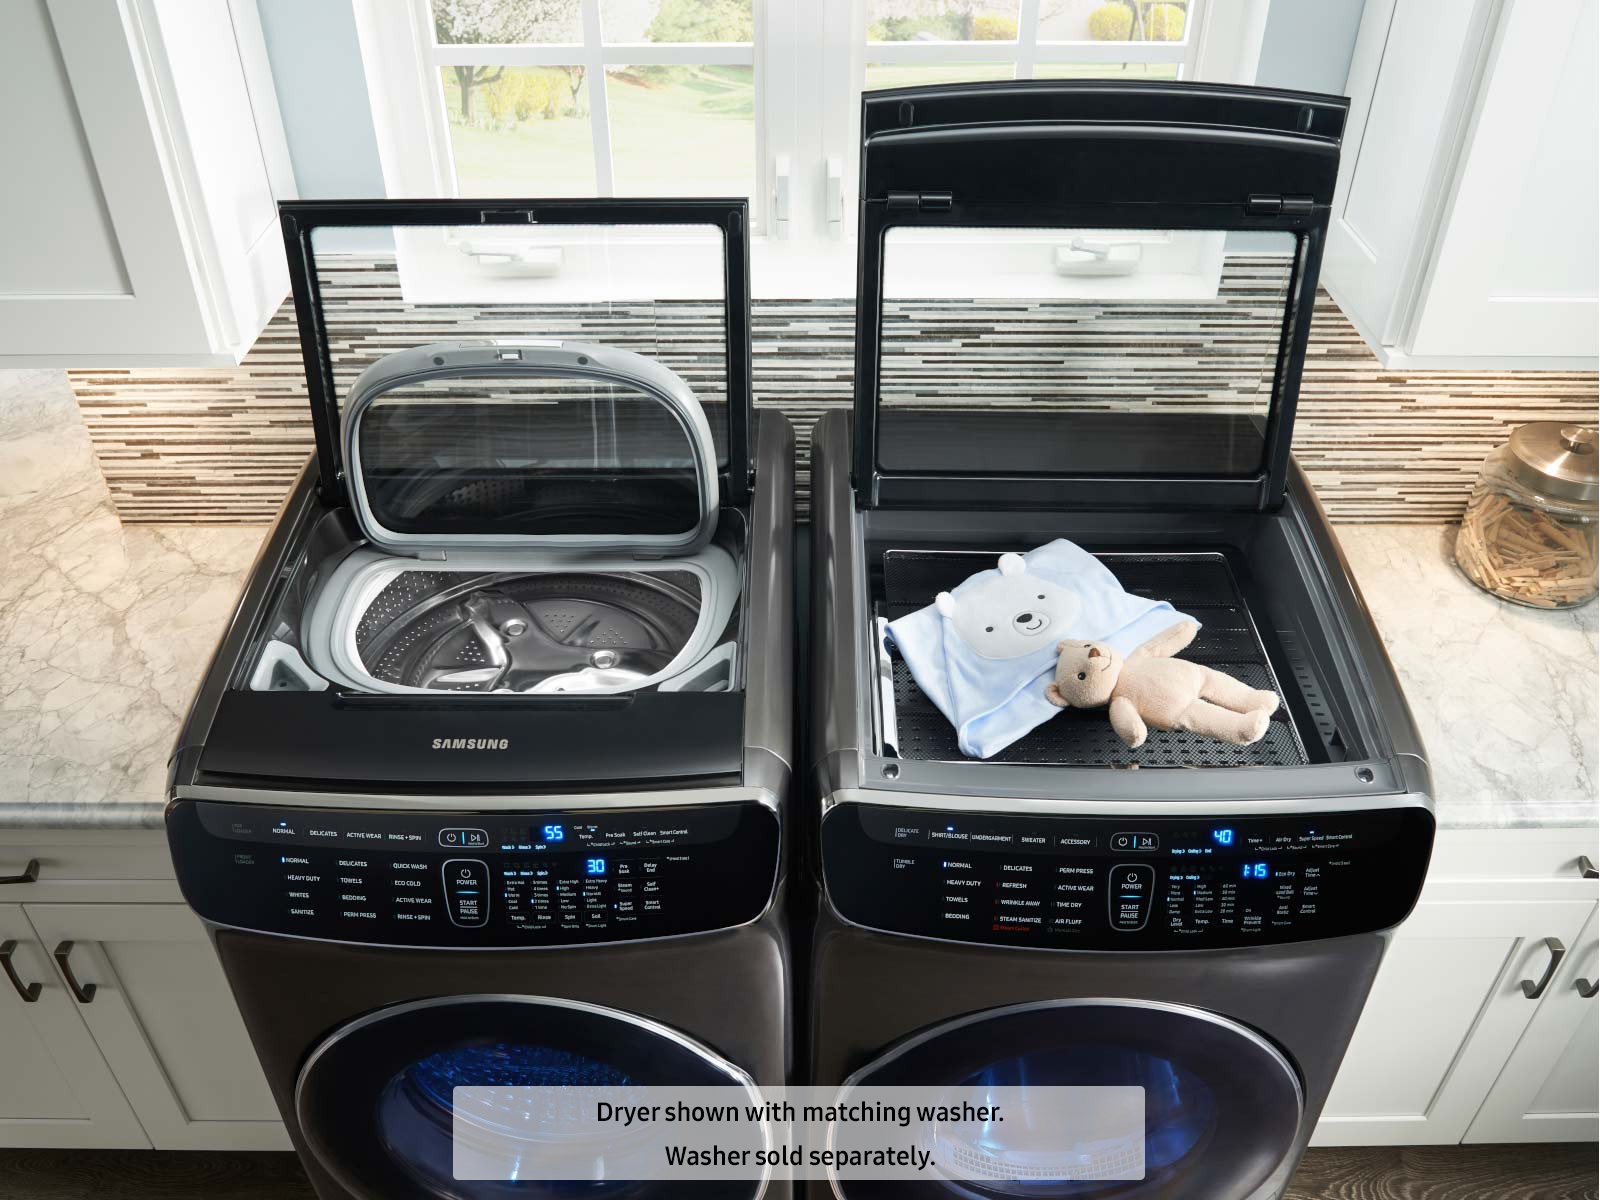 Best Washing Machines and Dryers of 2016 - Reviewed.com Laundry - Reviewed